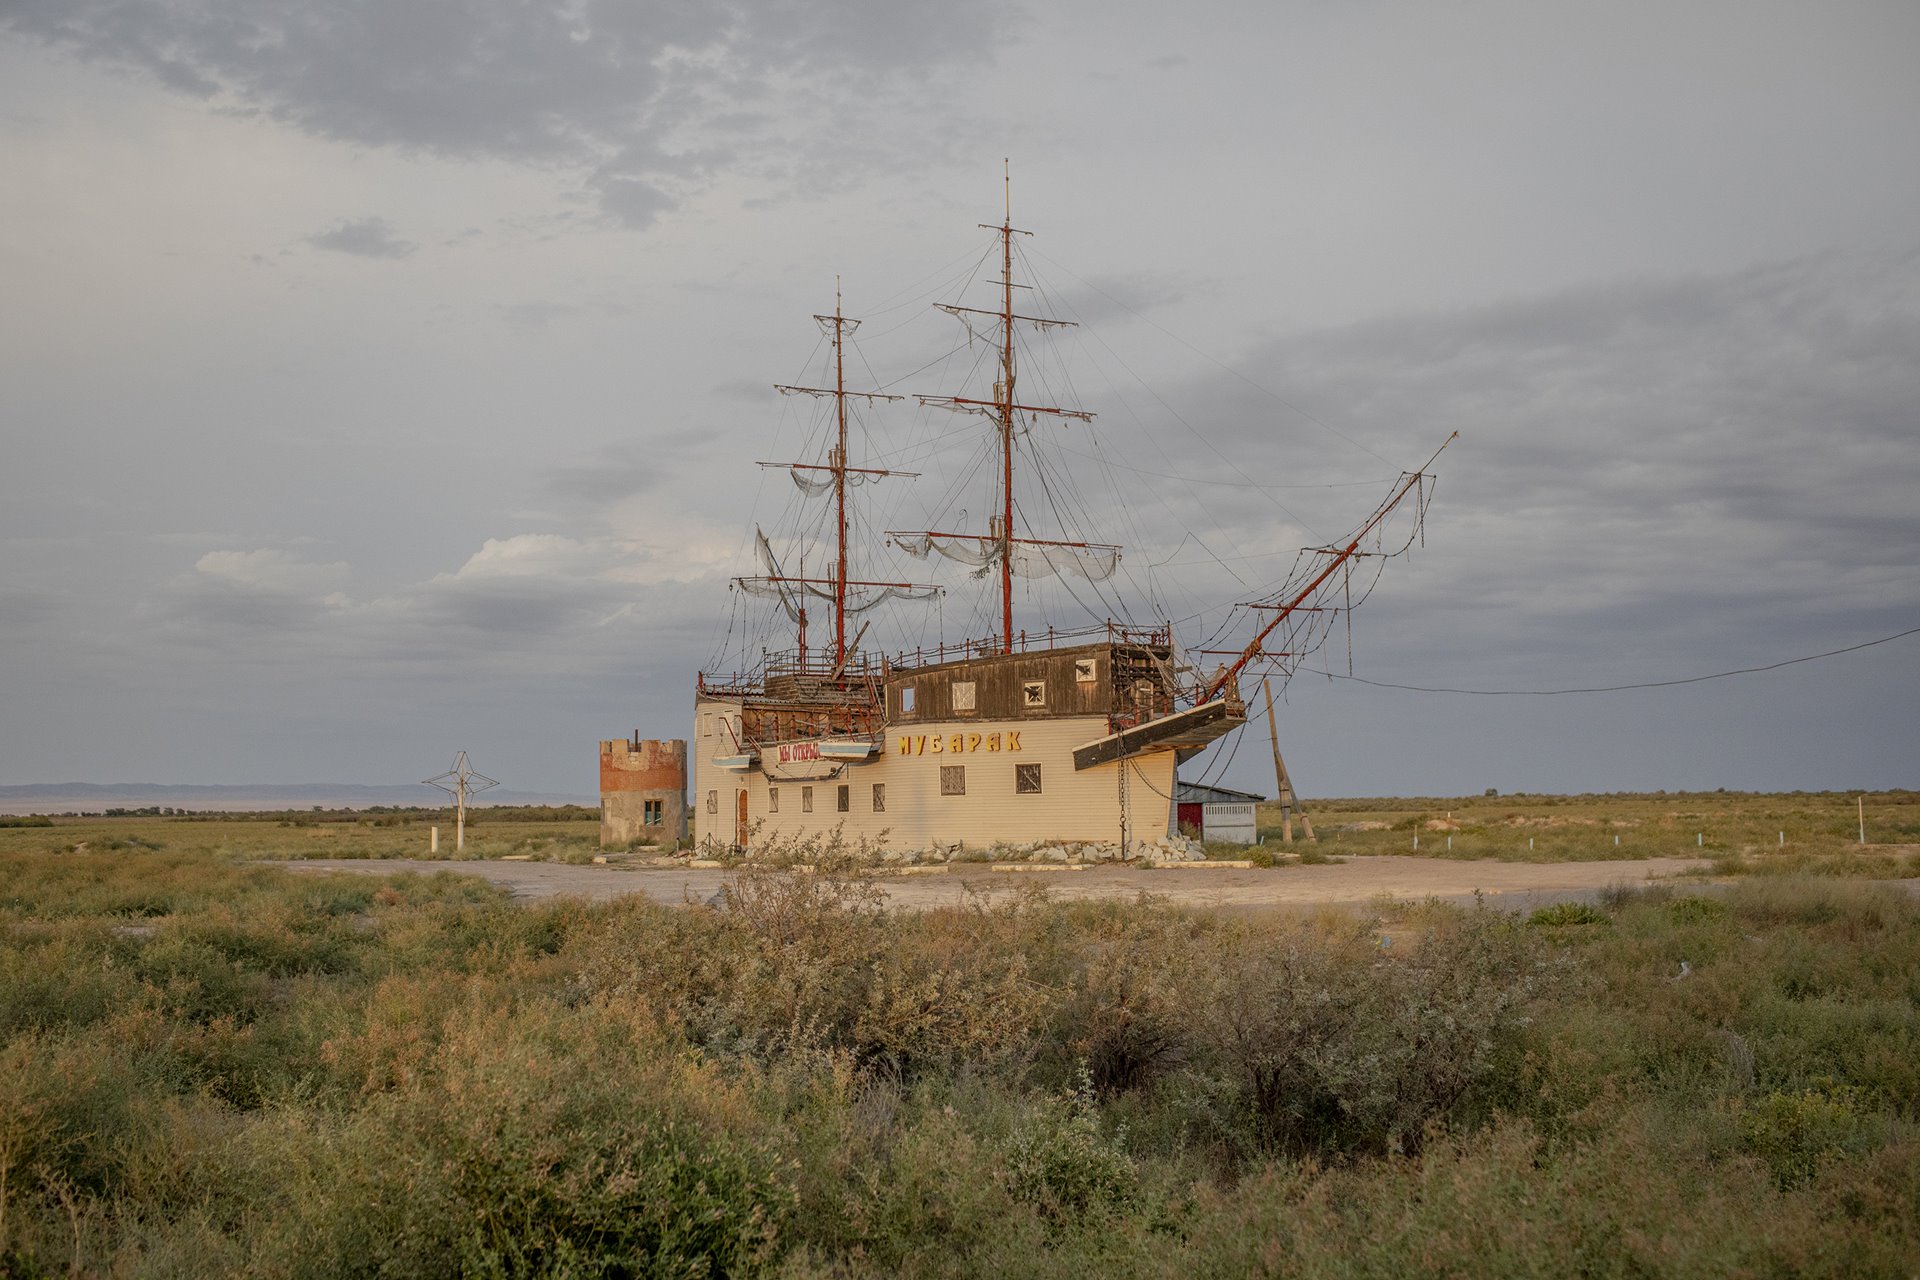 A former restaurant, which locals call the <em>Titanic</em>, stands abandoned on a steppe near Lake Balkhash, in Kazakhstan. Like the Aral Sea, the lake &ndash; &nbsp;one of the largest in Asia &ndash; is shrinking due to the diversion of water from rivers that feed it for agriculture and industry.